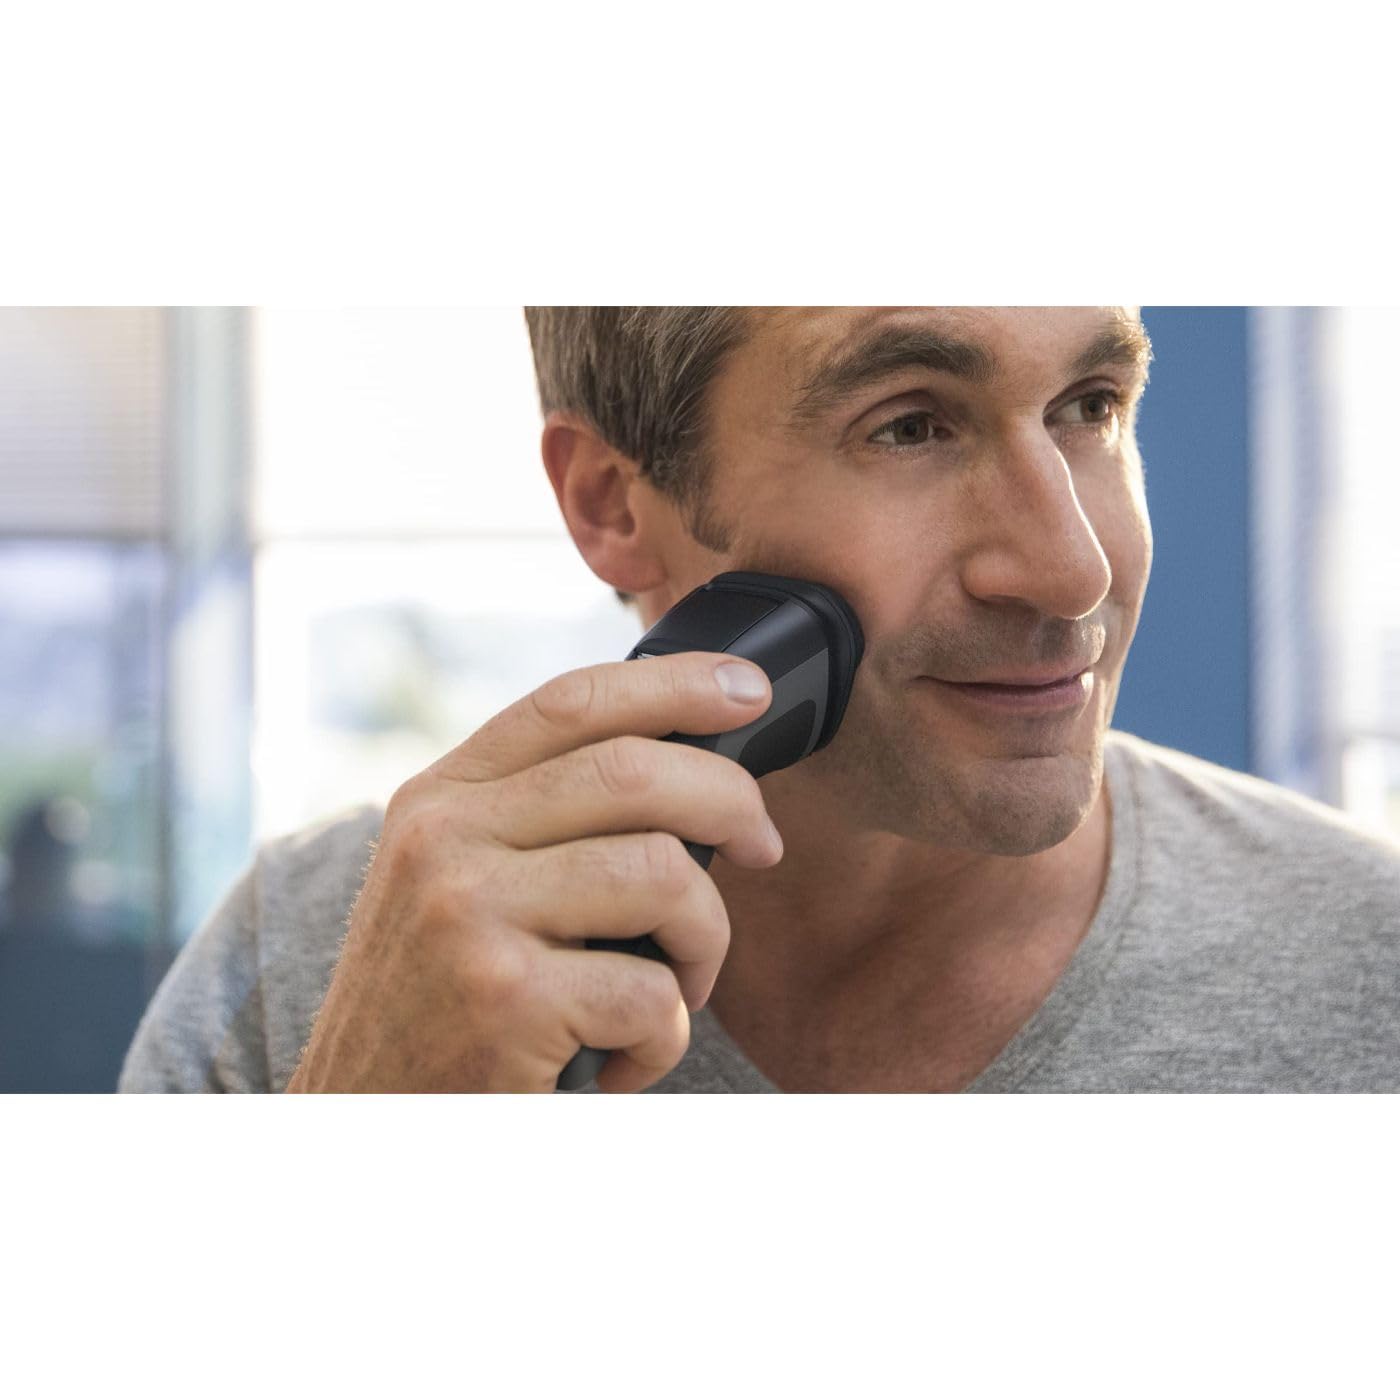 Philips Norelco Shaver 2300 Rechargeable Electric Shaver with PopUp Trimmer for male, Black, 1 Count, S1211/81